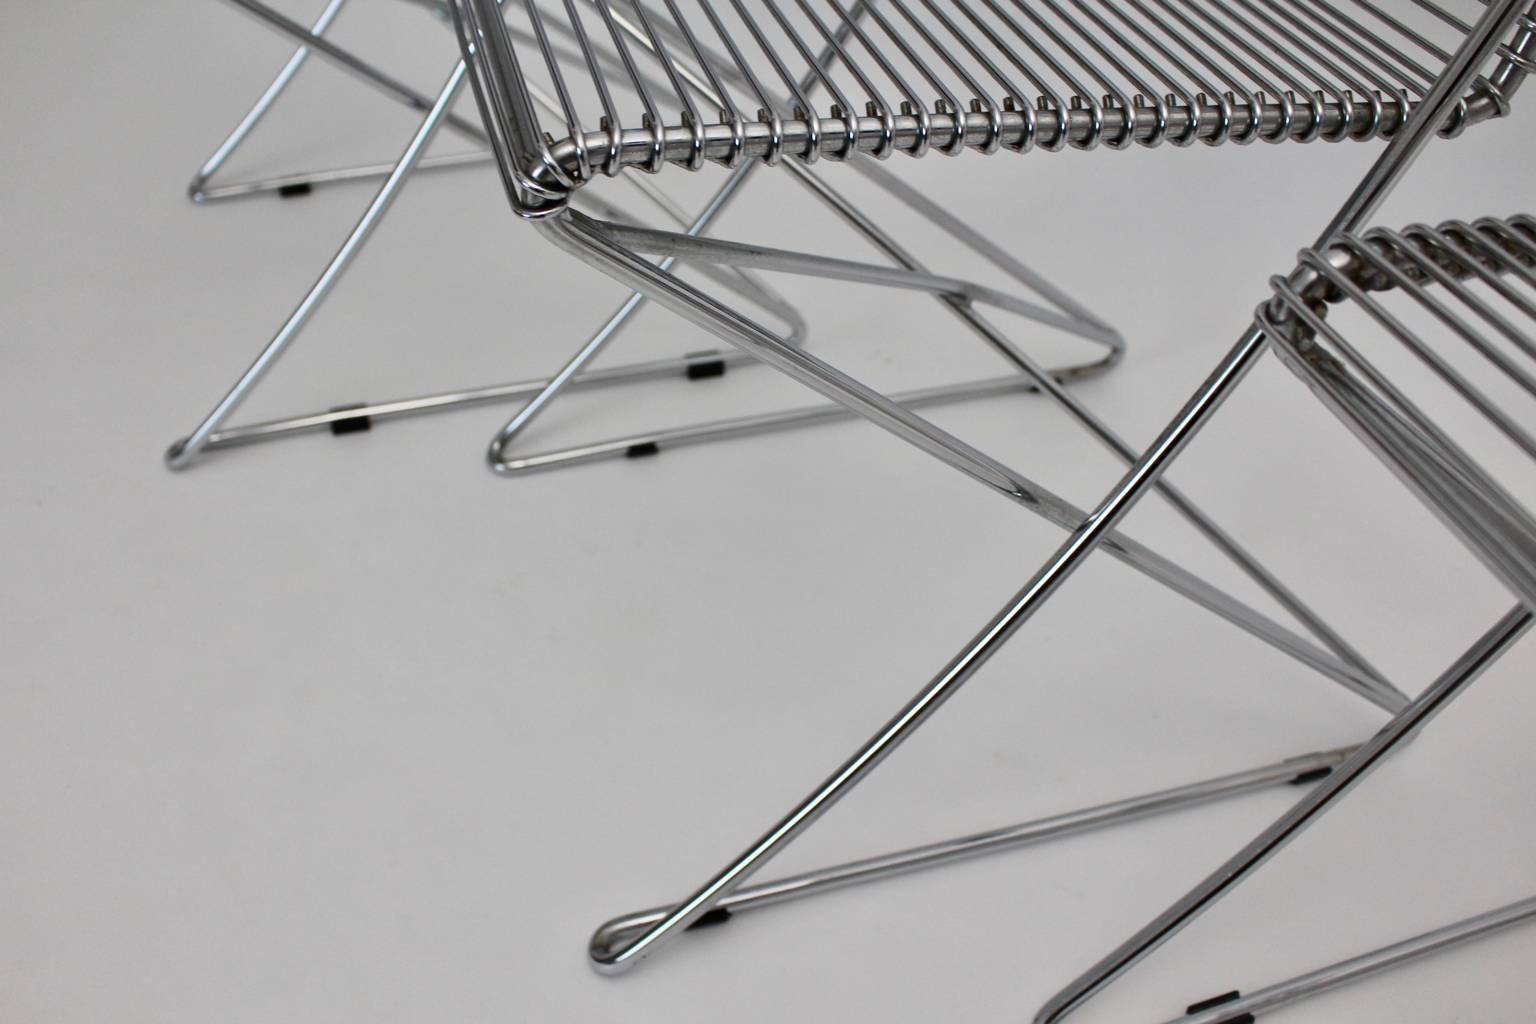 Chromed Steel Wire Vintage Chairs Kreuzschwinger by Till Behrens, 1983, Germany 1